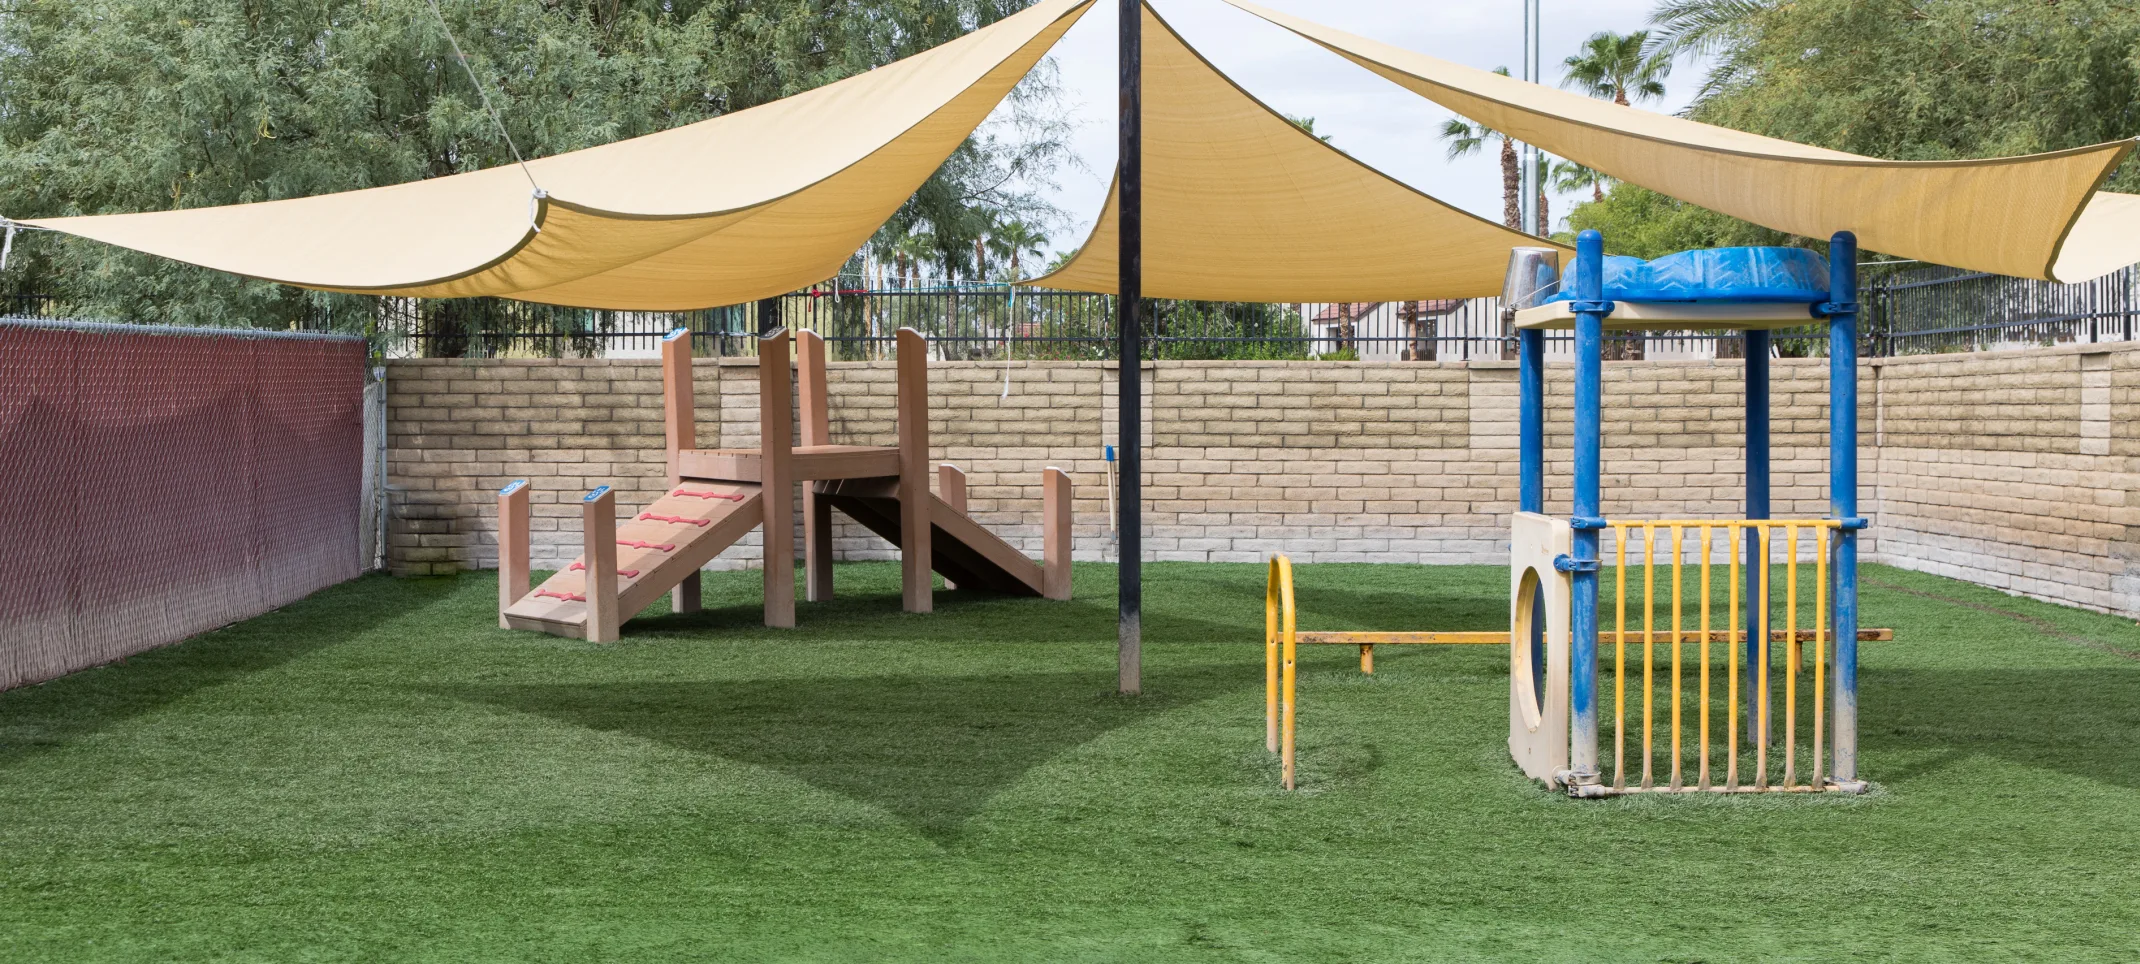 Doggie District - Paradise Valley - Outdoor play area